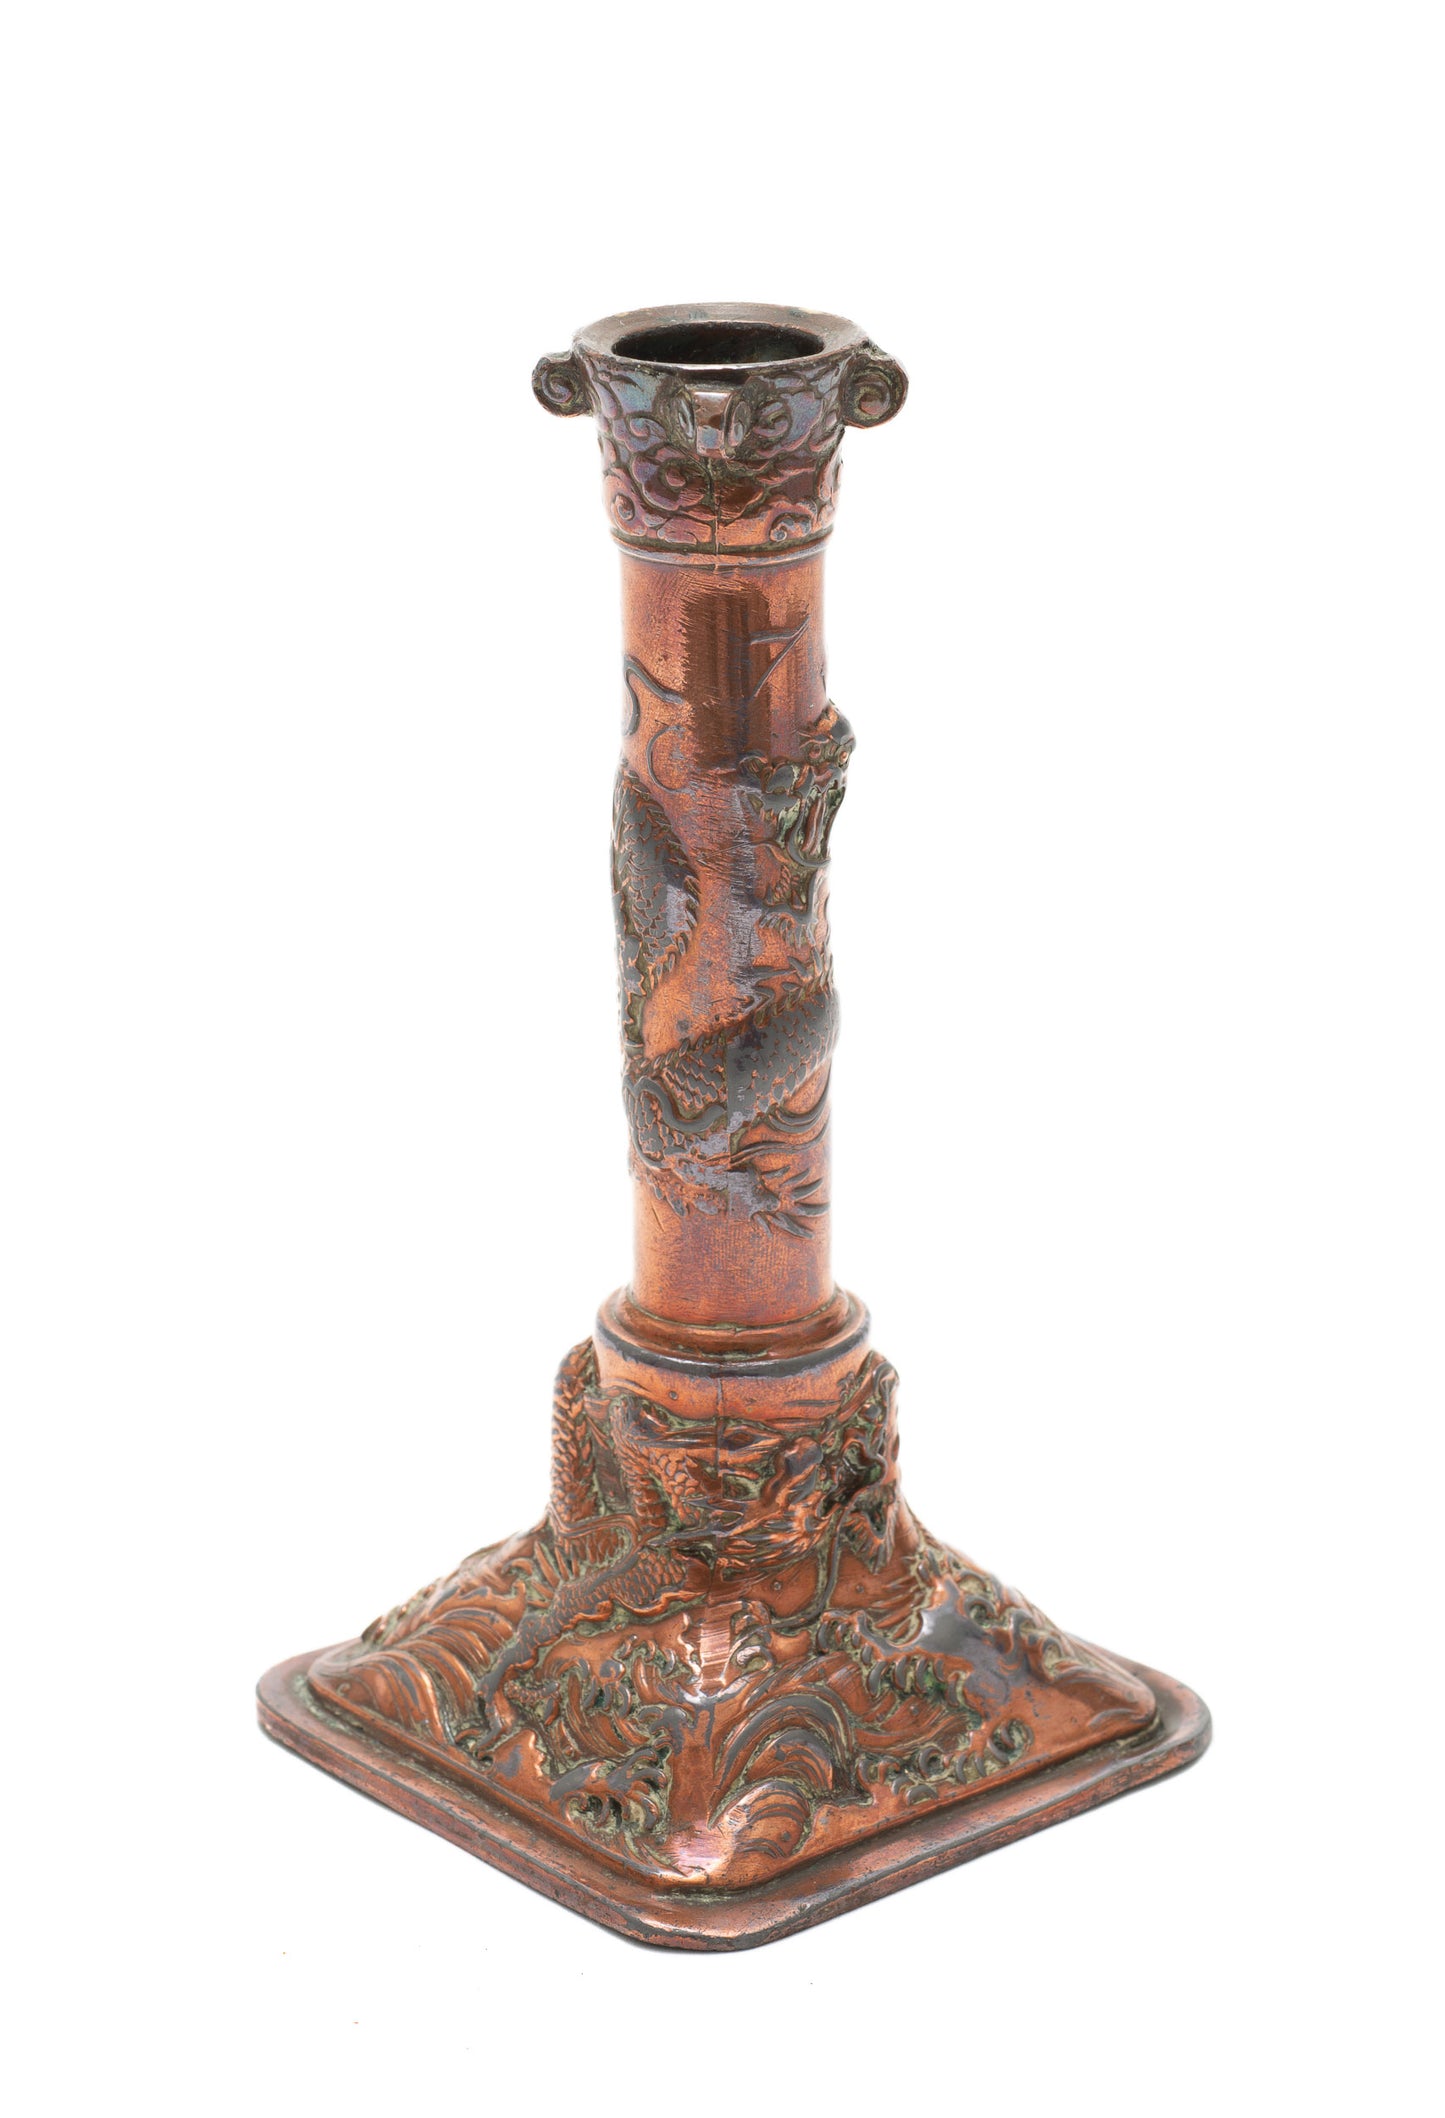 Antique Japanese Antimony & Copper Plated Candlestick with Dragons (Code 2210)